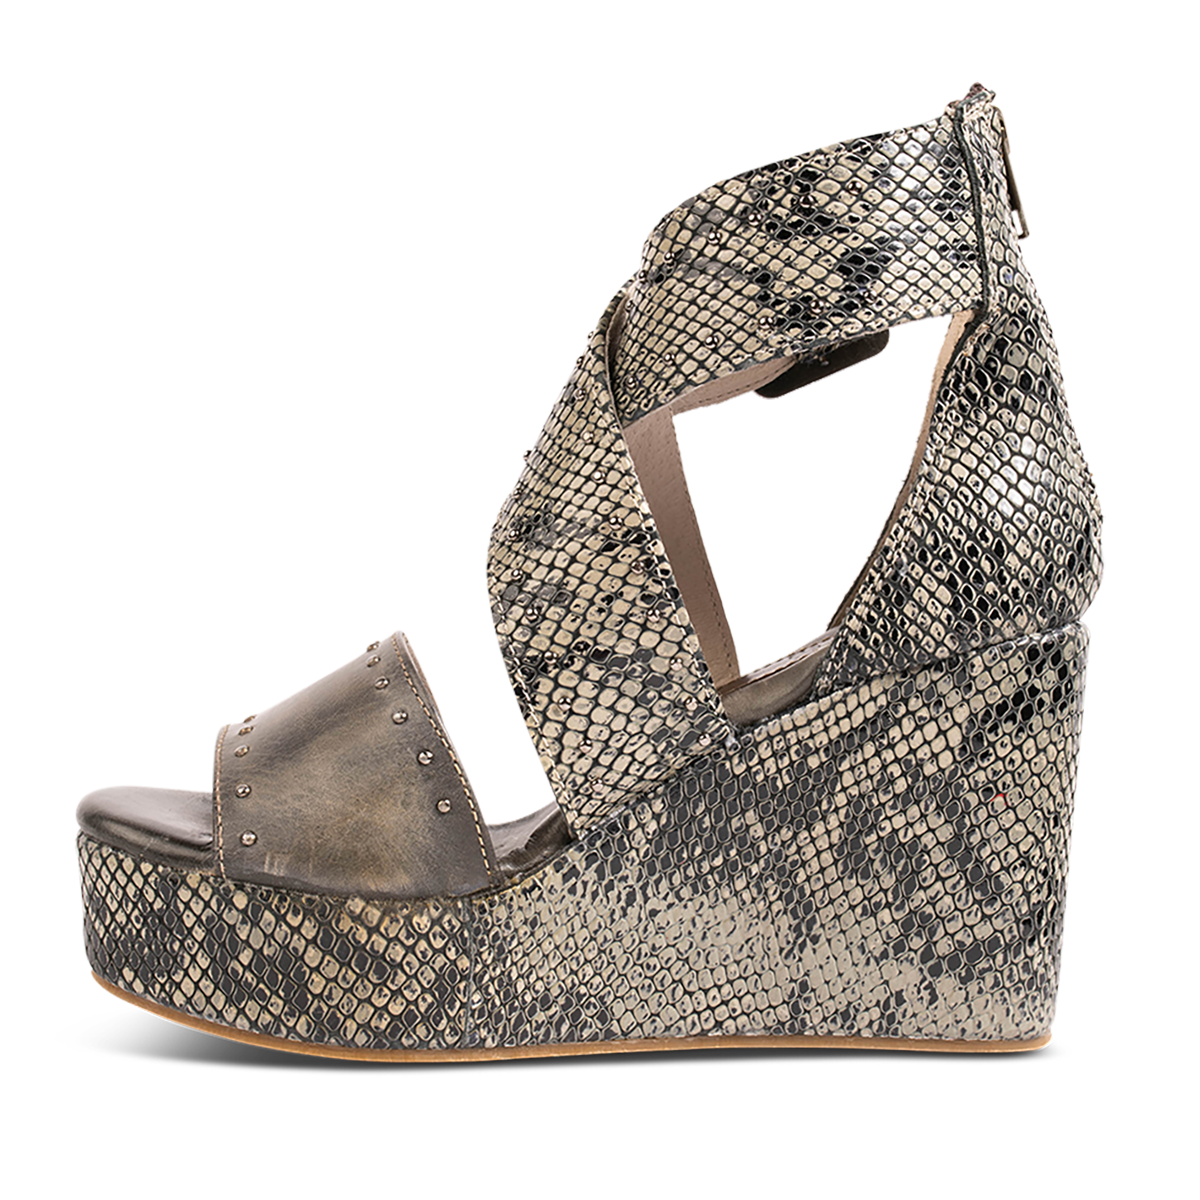 Inside view showing wedge heel and ankle straps on FREEBIRD women's Terra olive snake multi platform sandal with stud detailing